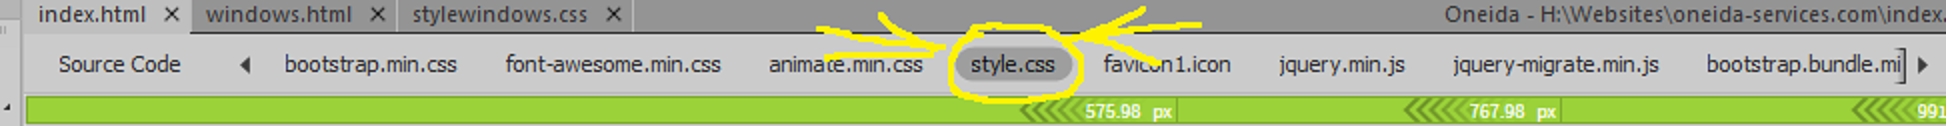 style css2.png